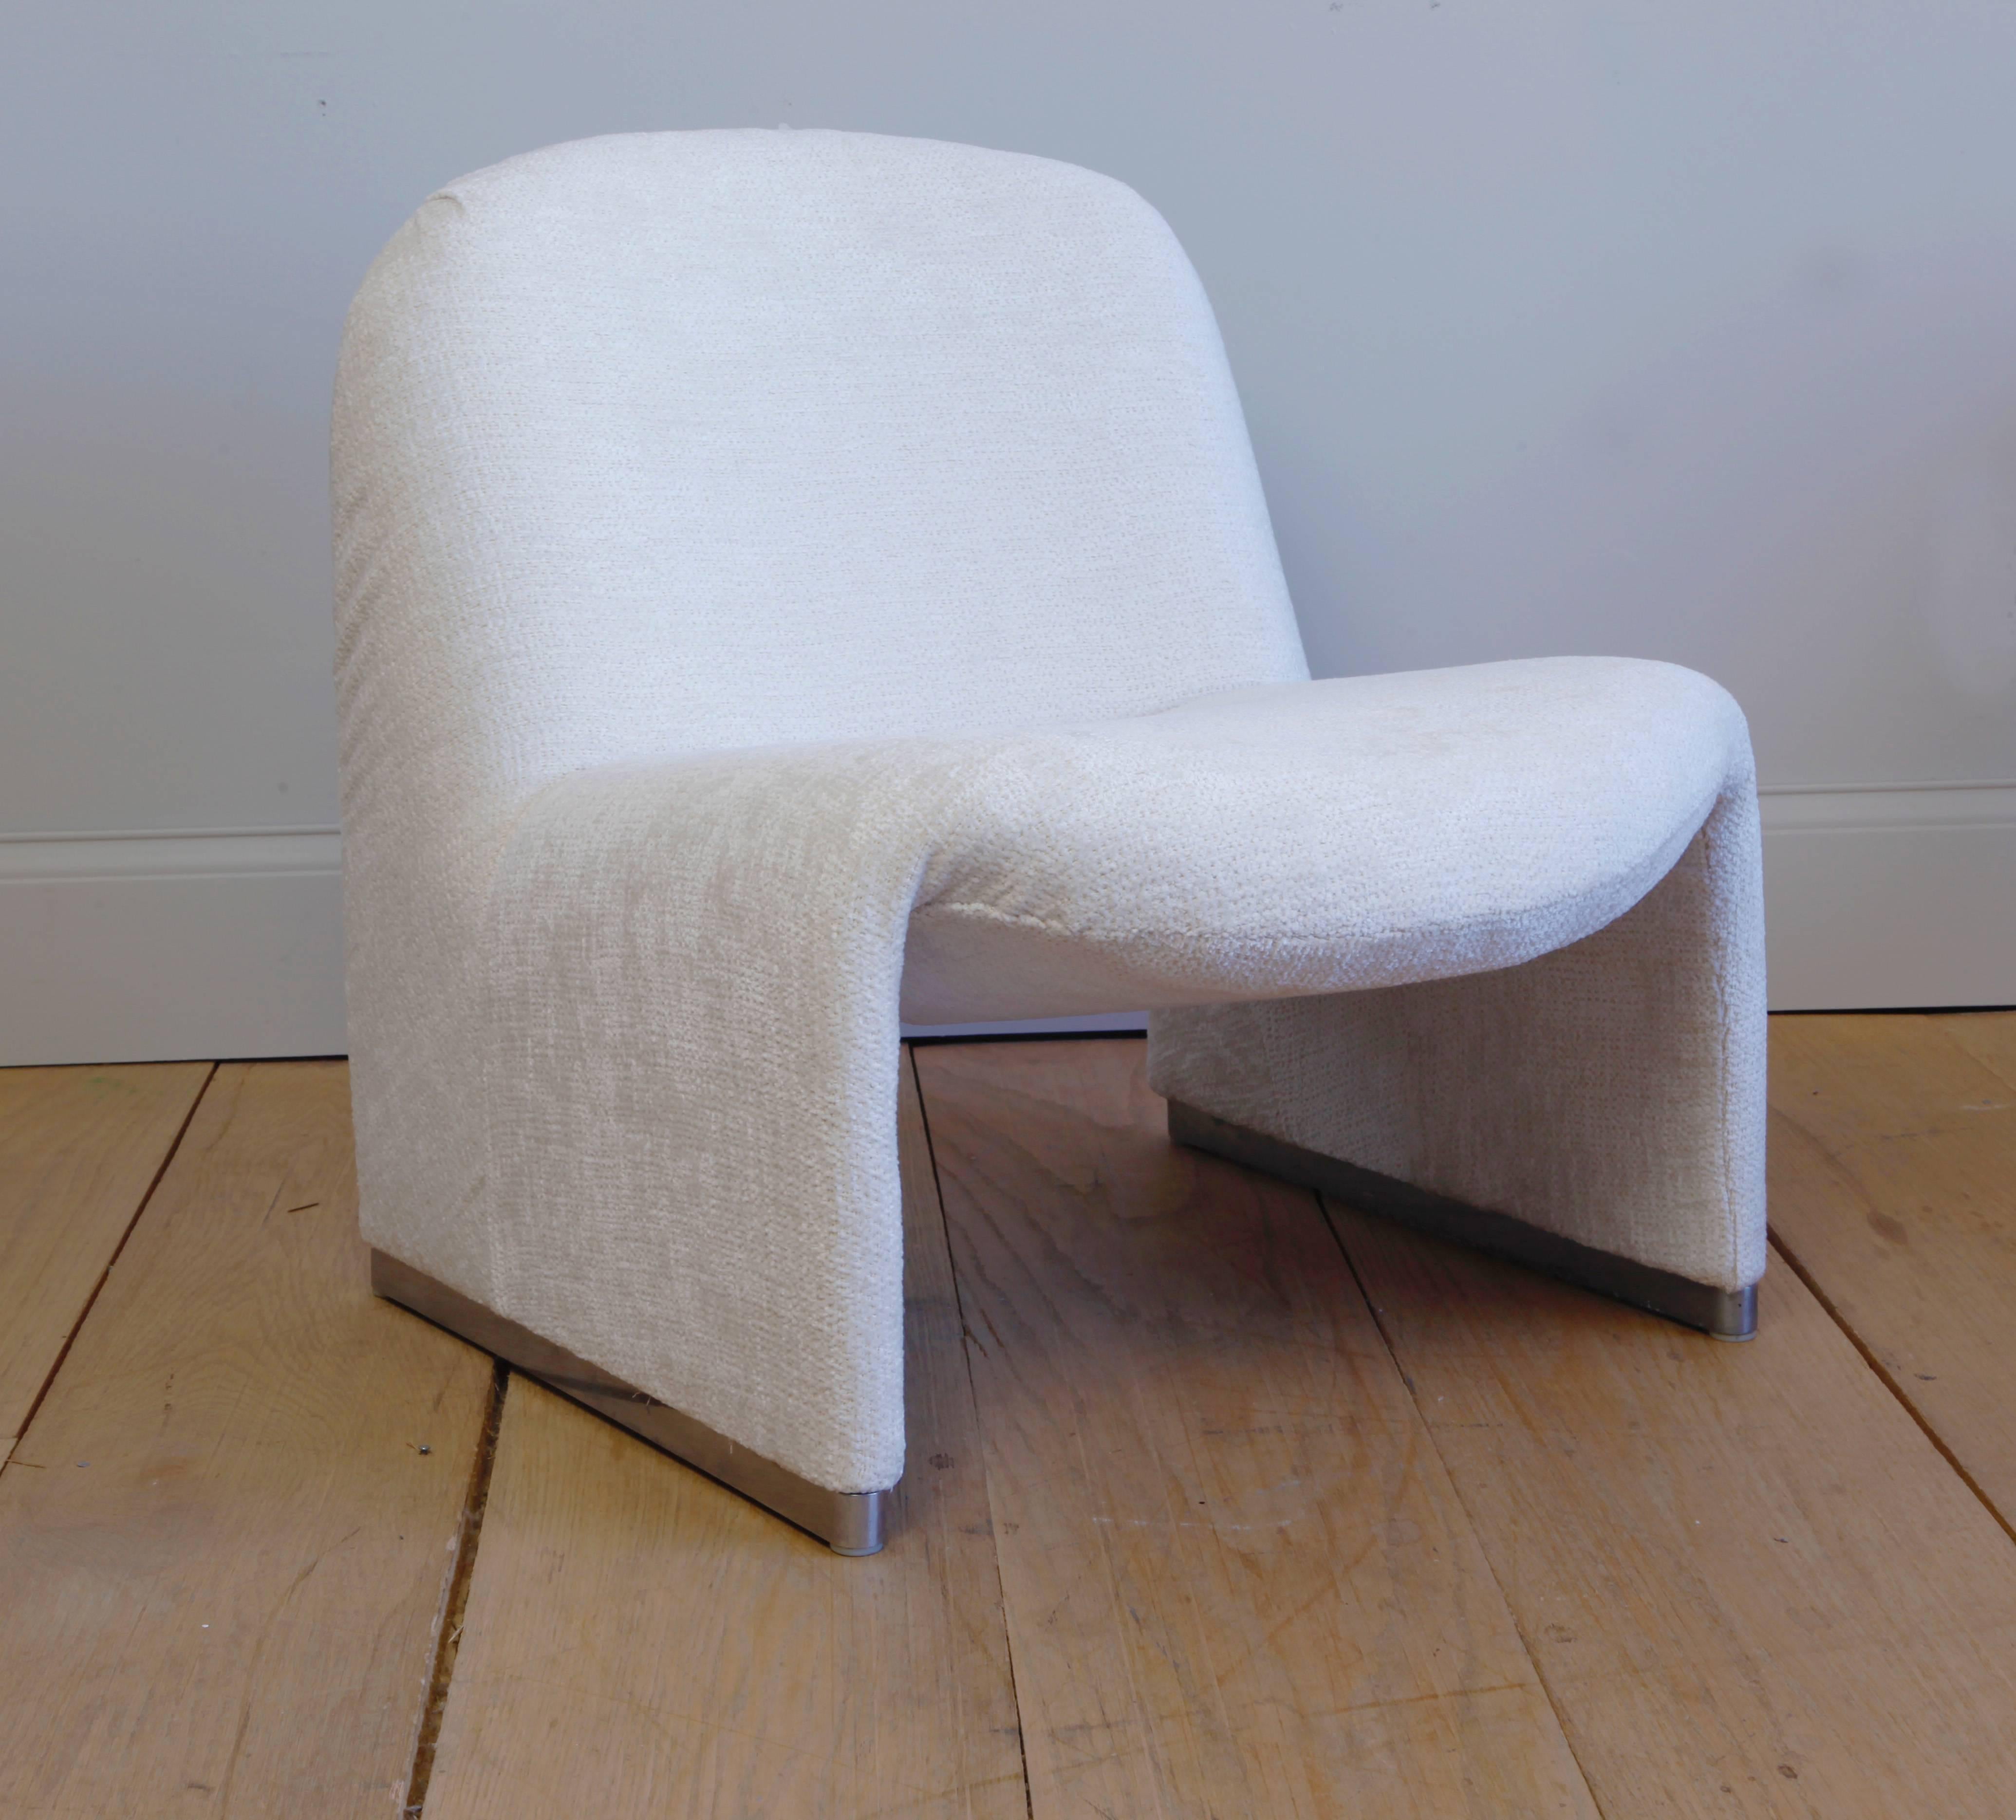 Elegant lounge chairs designed by Giancarlo Piretti for Castelli, upholstered in a soft white chenille on metal bases. The chairs can be attached to each other at the base to form a loveseat.